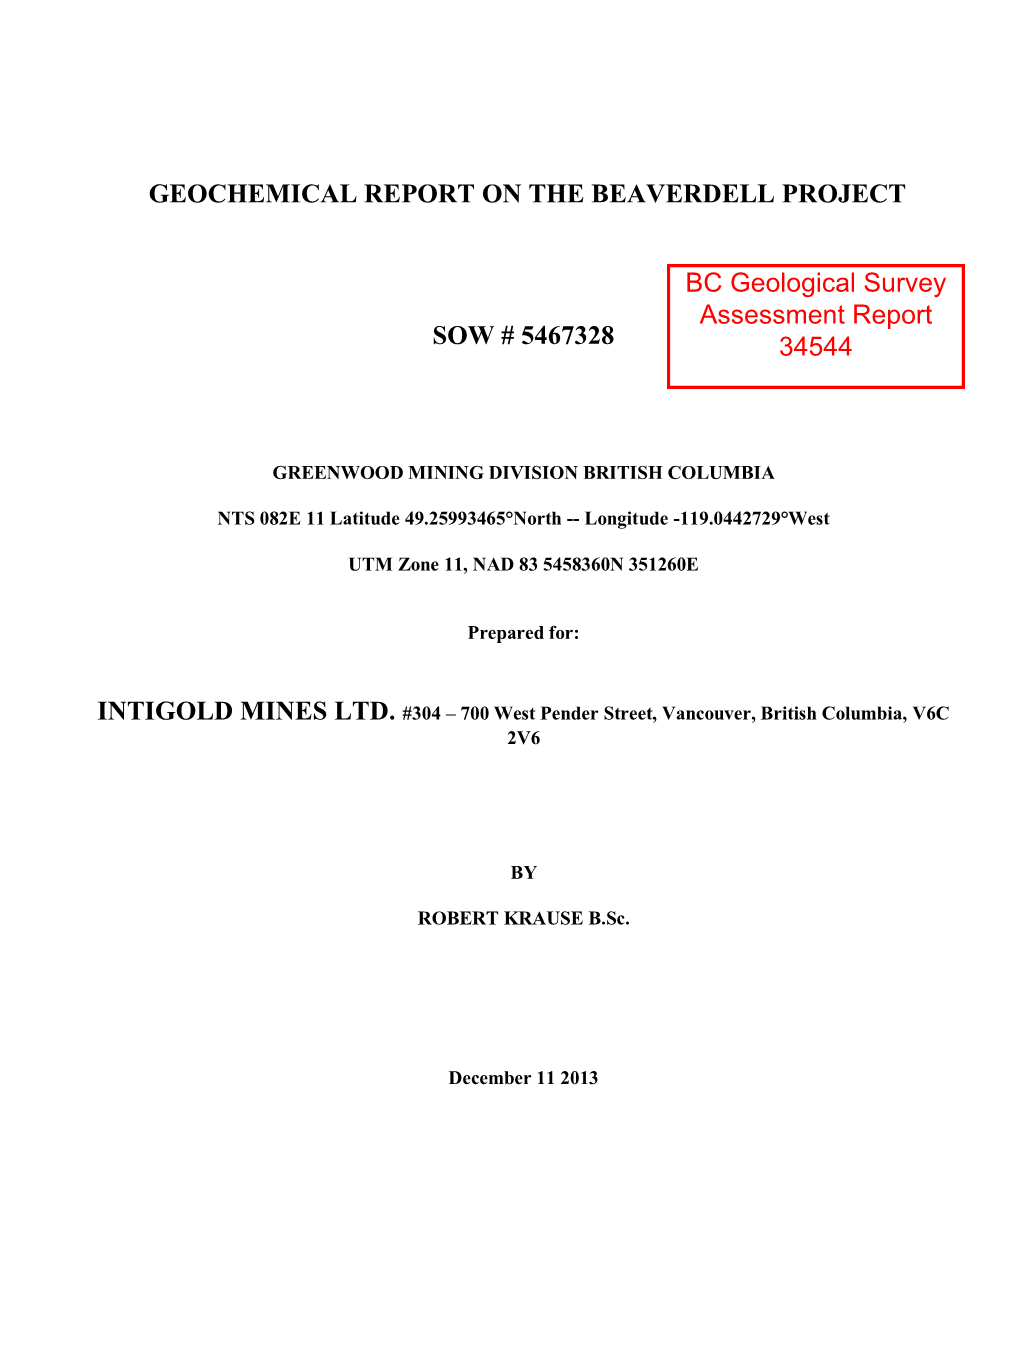 Geochemical Report on the Beaverdell Project Sow